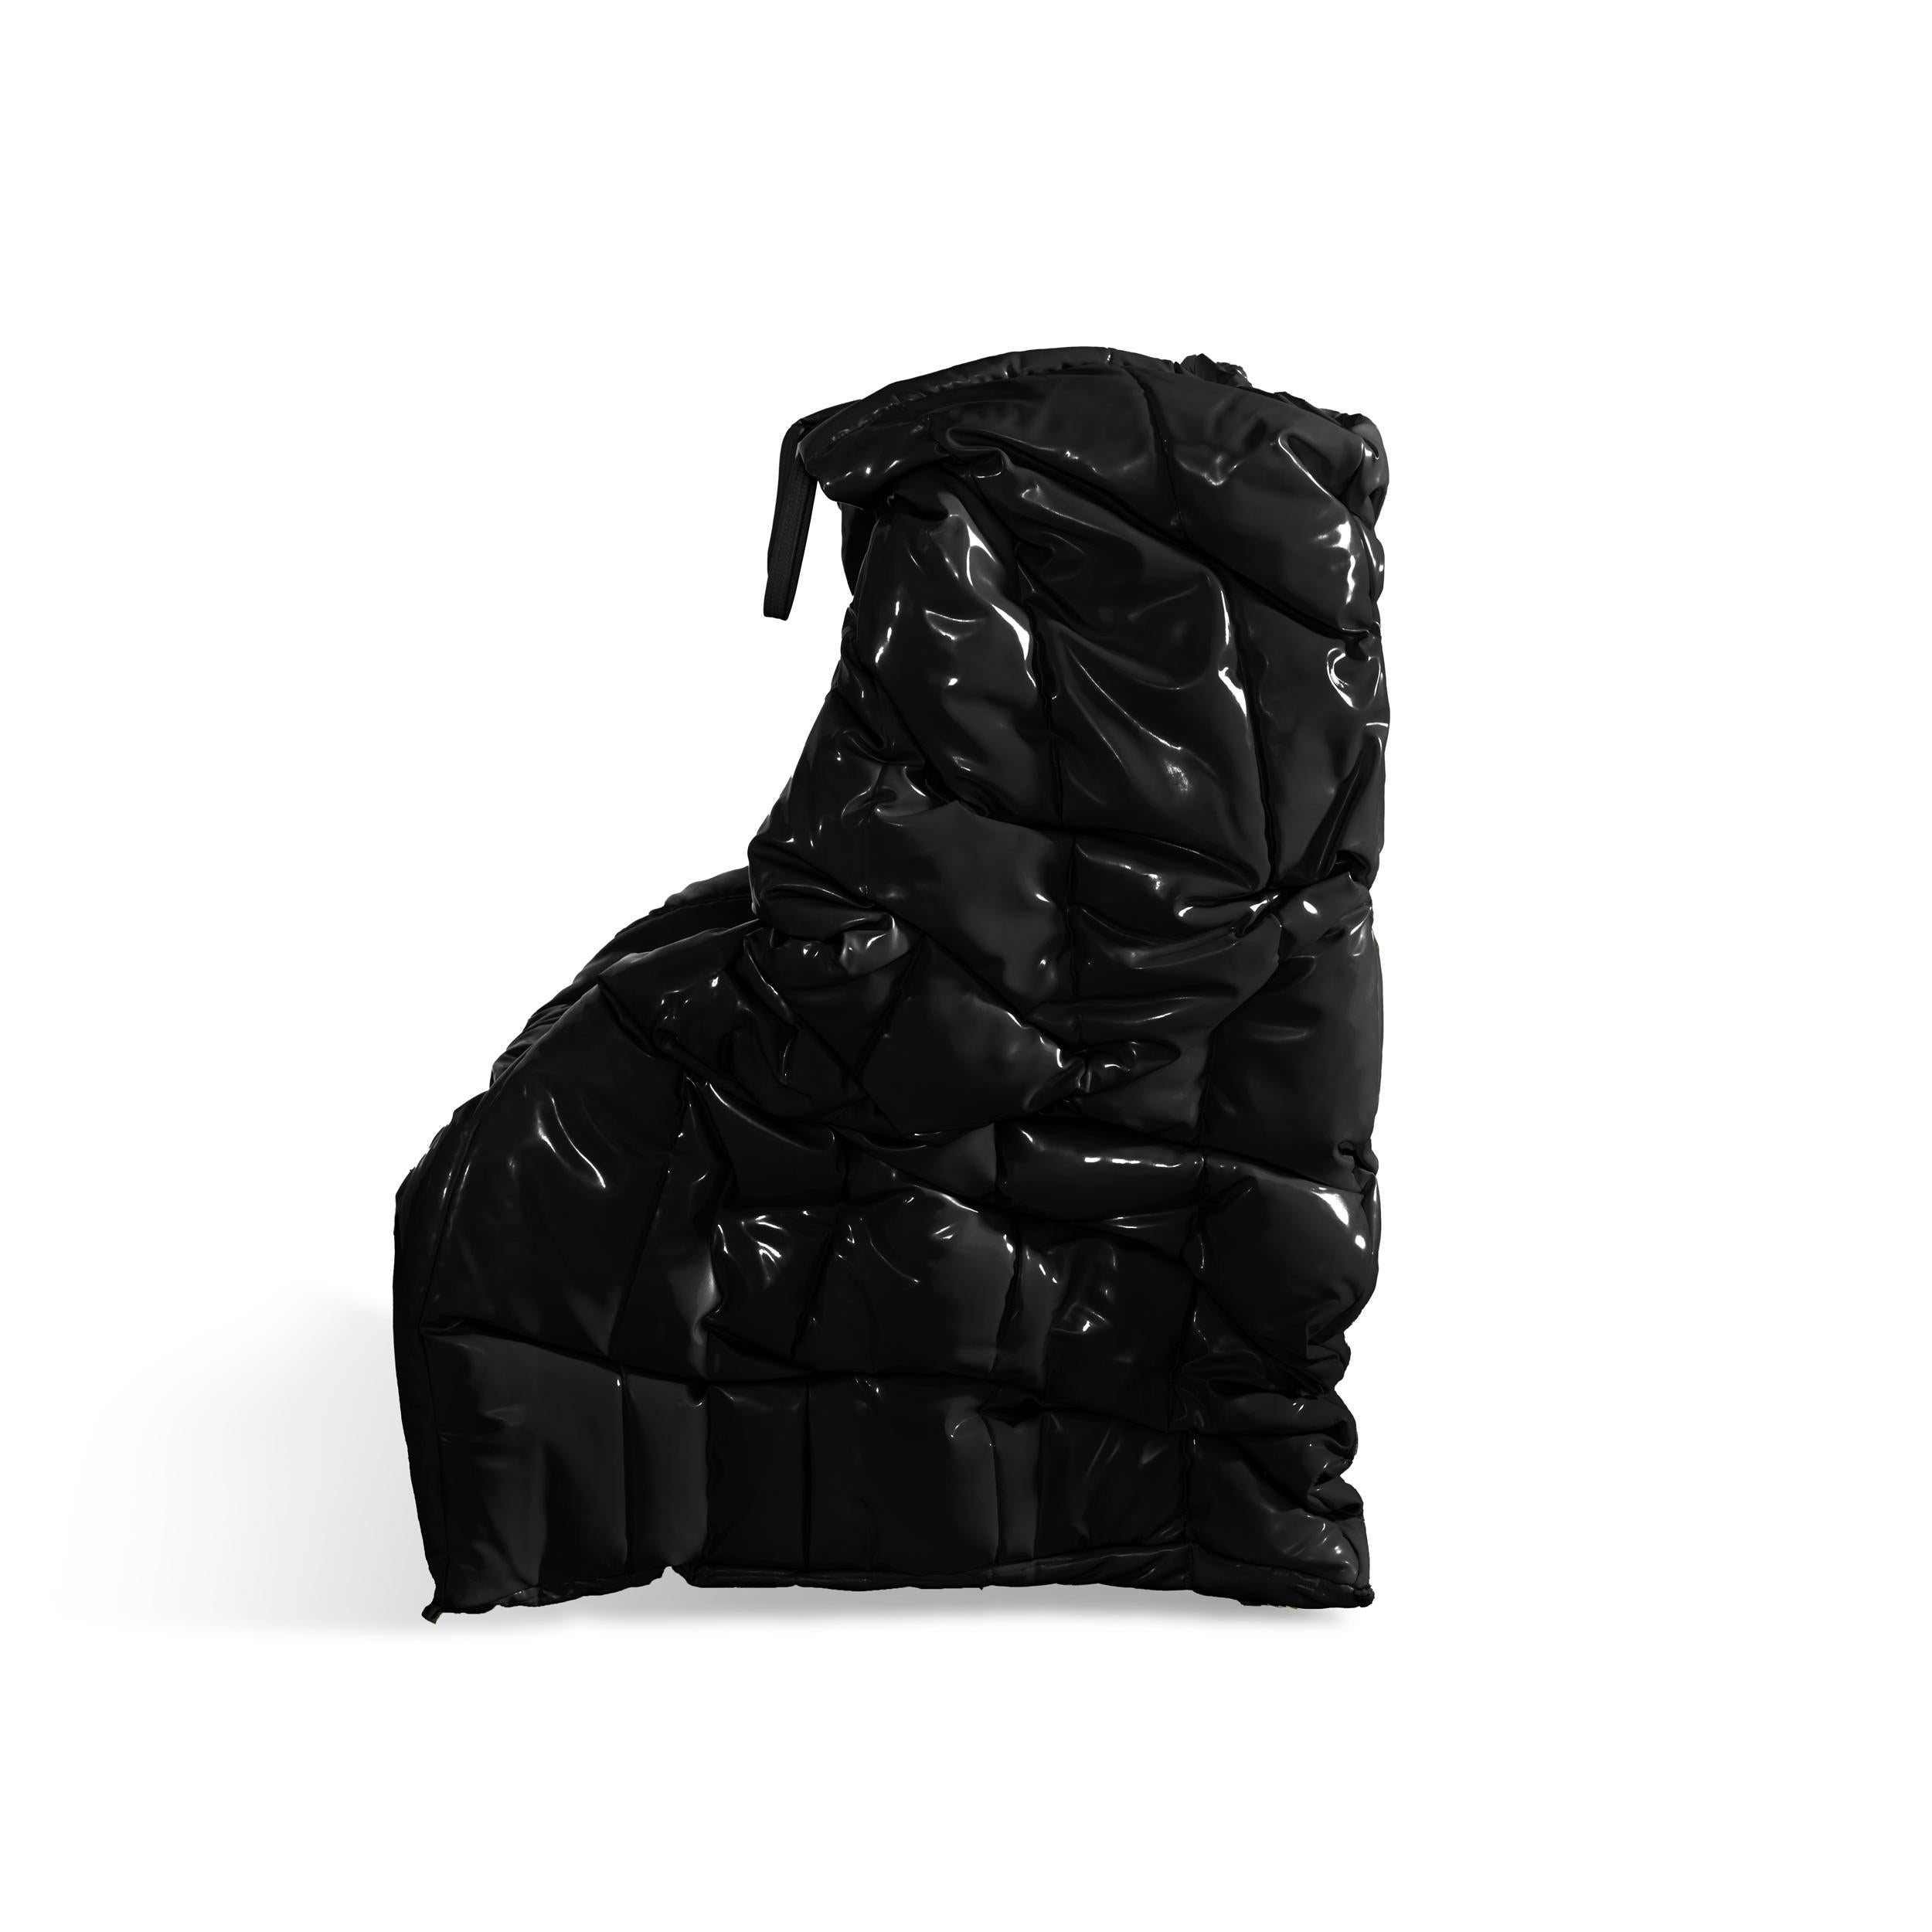 Shadow Armchair by Gaetano Pesce - Black In New Condition For Sale In La Morra, CN